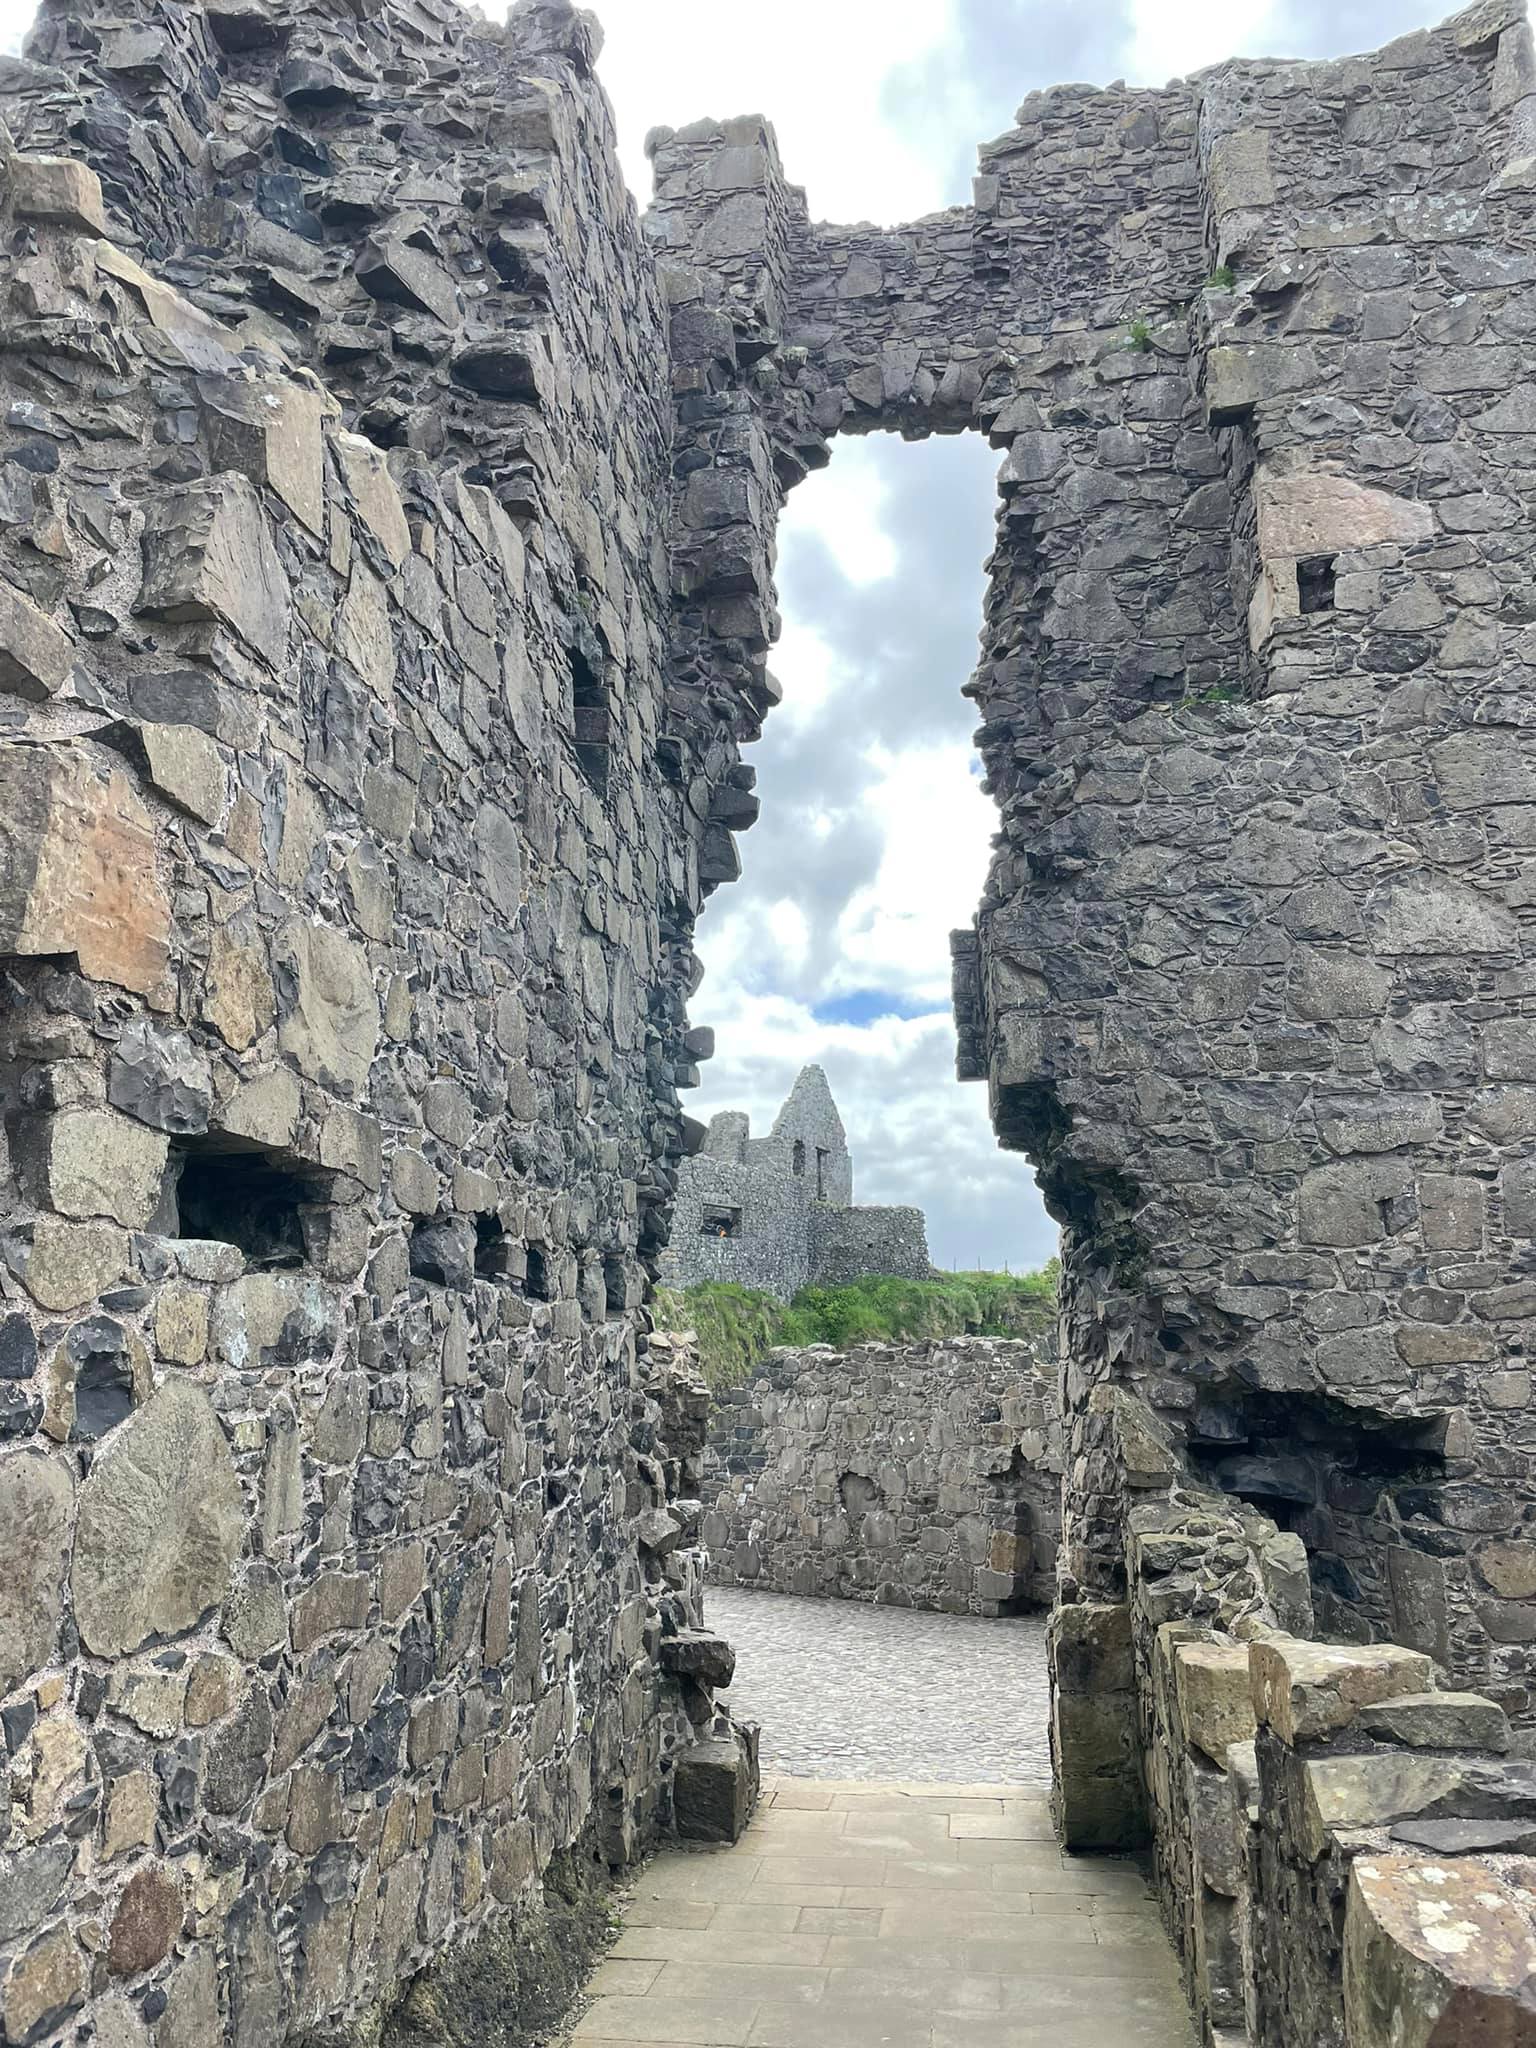 Small corridor in ancient stone castle ruins, with a stone castle tower visible in the distance